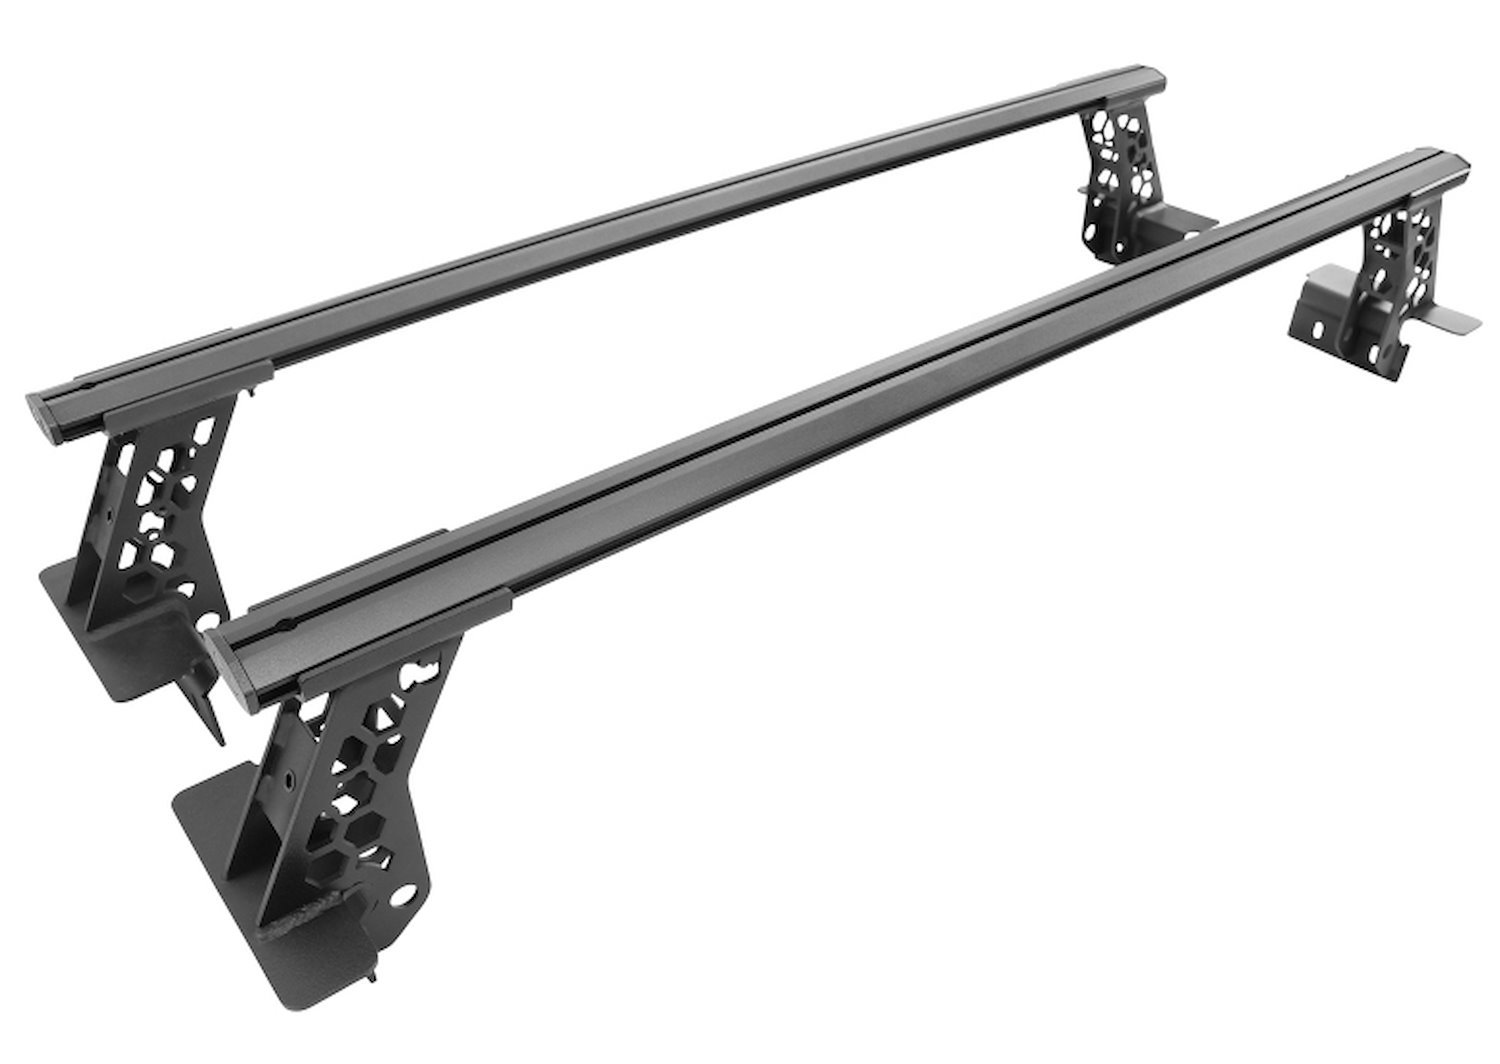 XRS Cross Bars Bed Rail Kit for Select Late-Model Chevy, Ford, GMC, Jeep, Nissan, Toyota Mid-Sized Crew/Ext. Cab Pickup Trucks